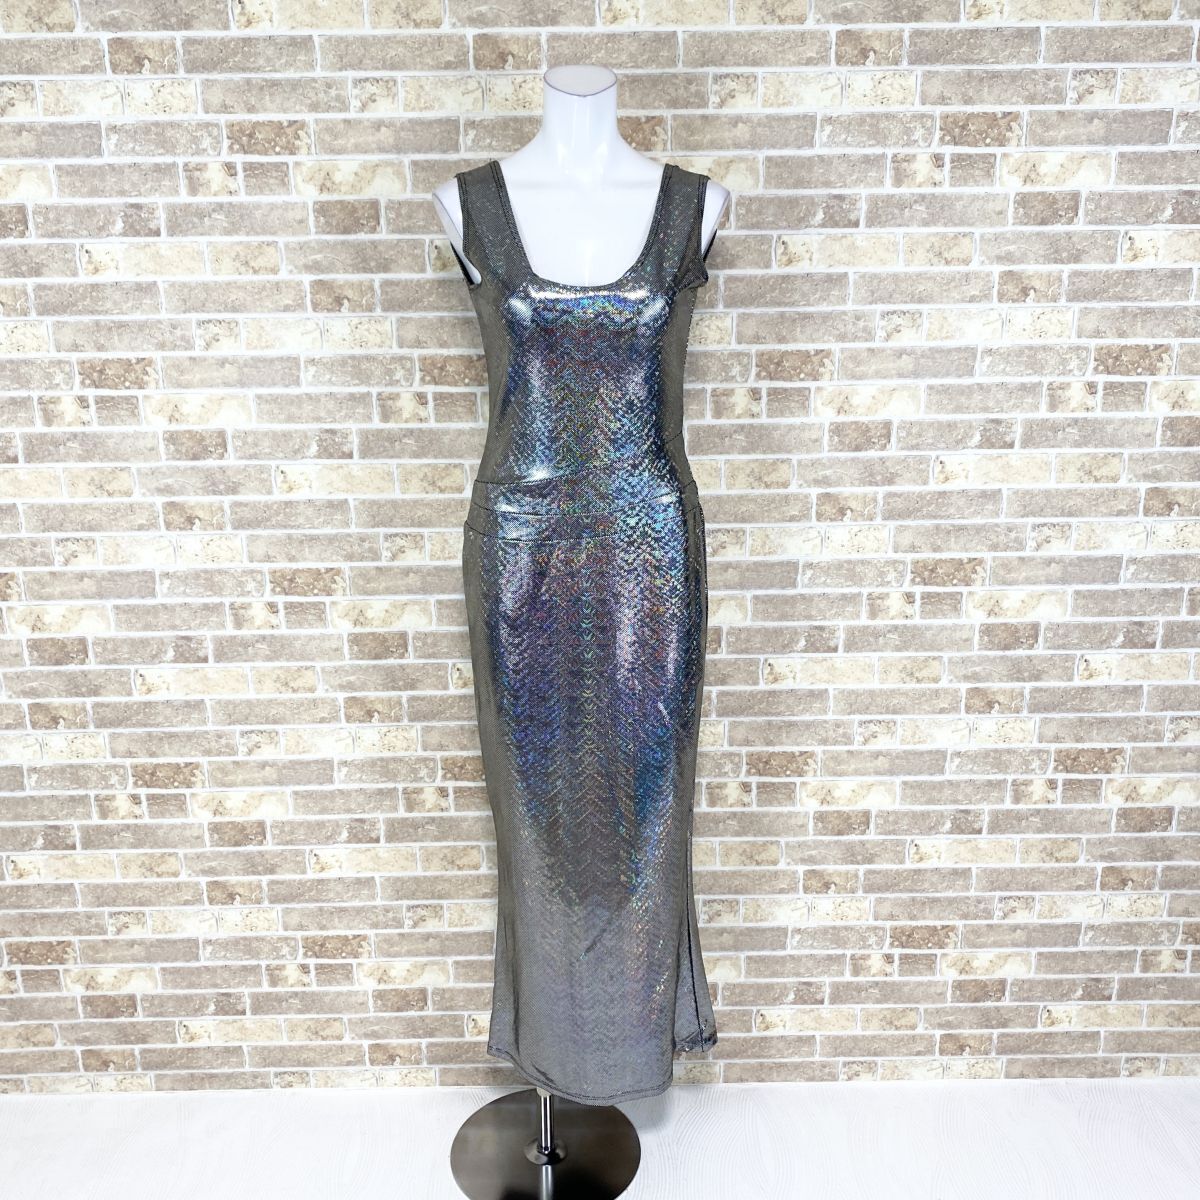 1 jpy dress Resille France made long dress 3 silver equipment ornament Mai pcs costume party dress color dress used 4105